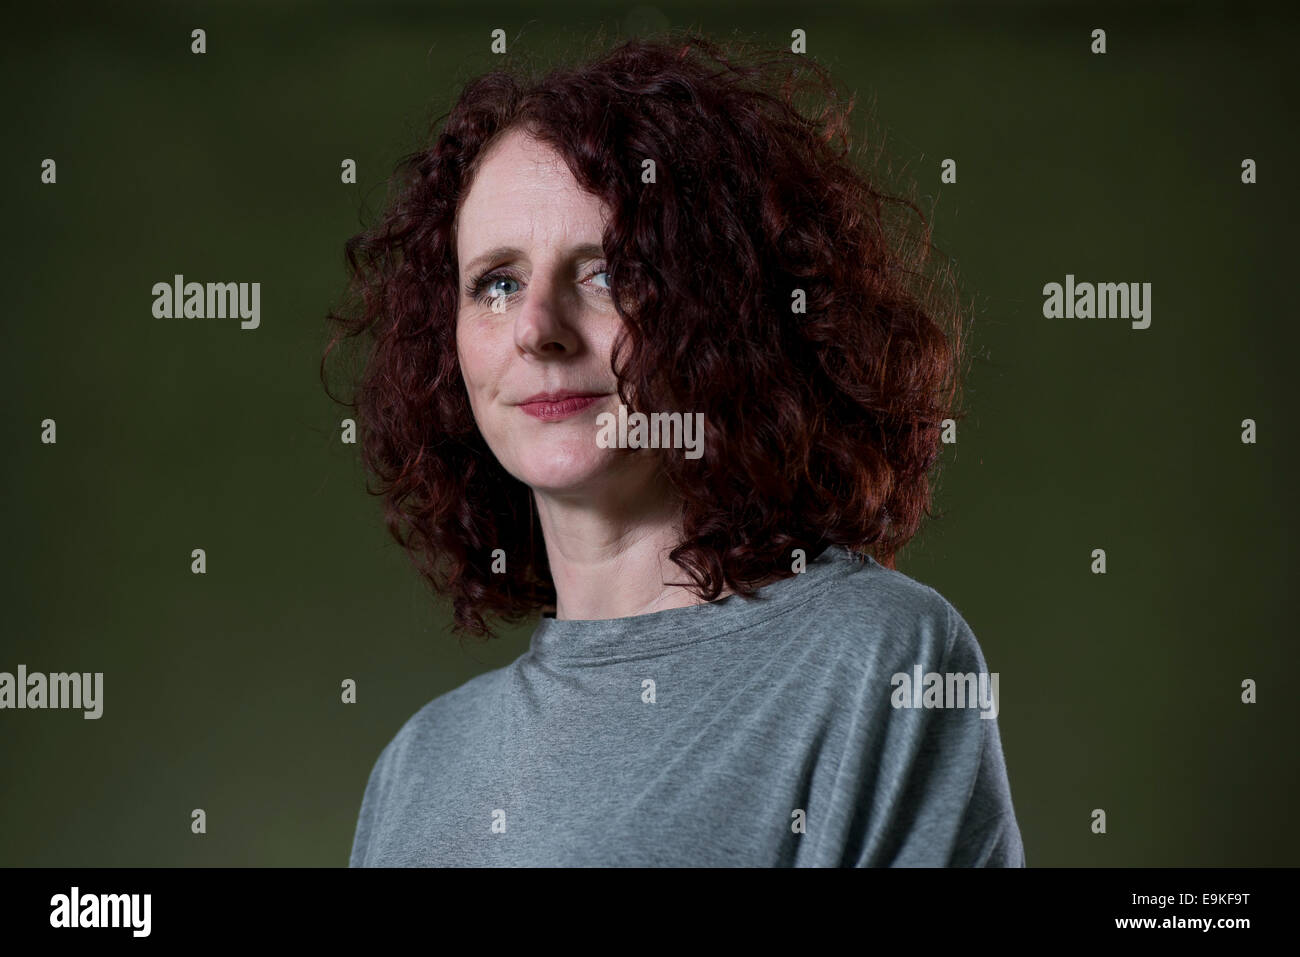 Northern Irish author of contemporary fiction Maggie O'Farrell appears at the Edinburgh International Book Festival. Stock Photo